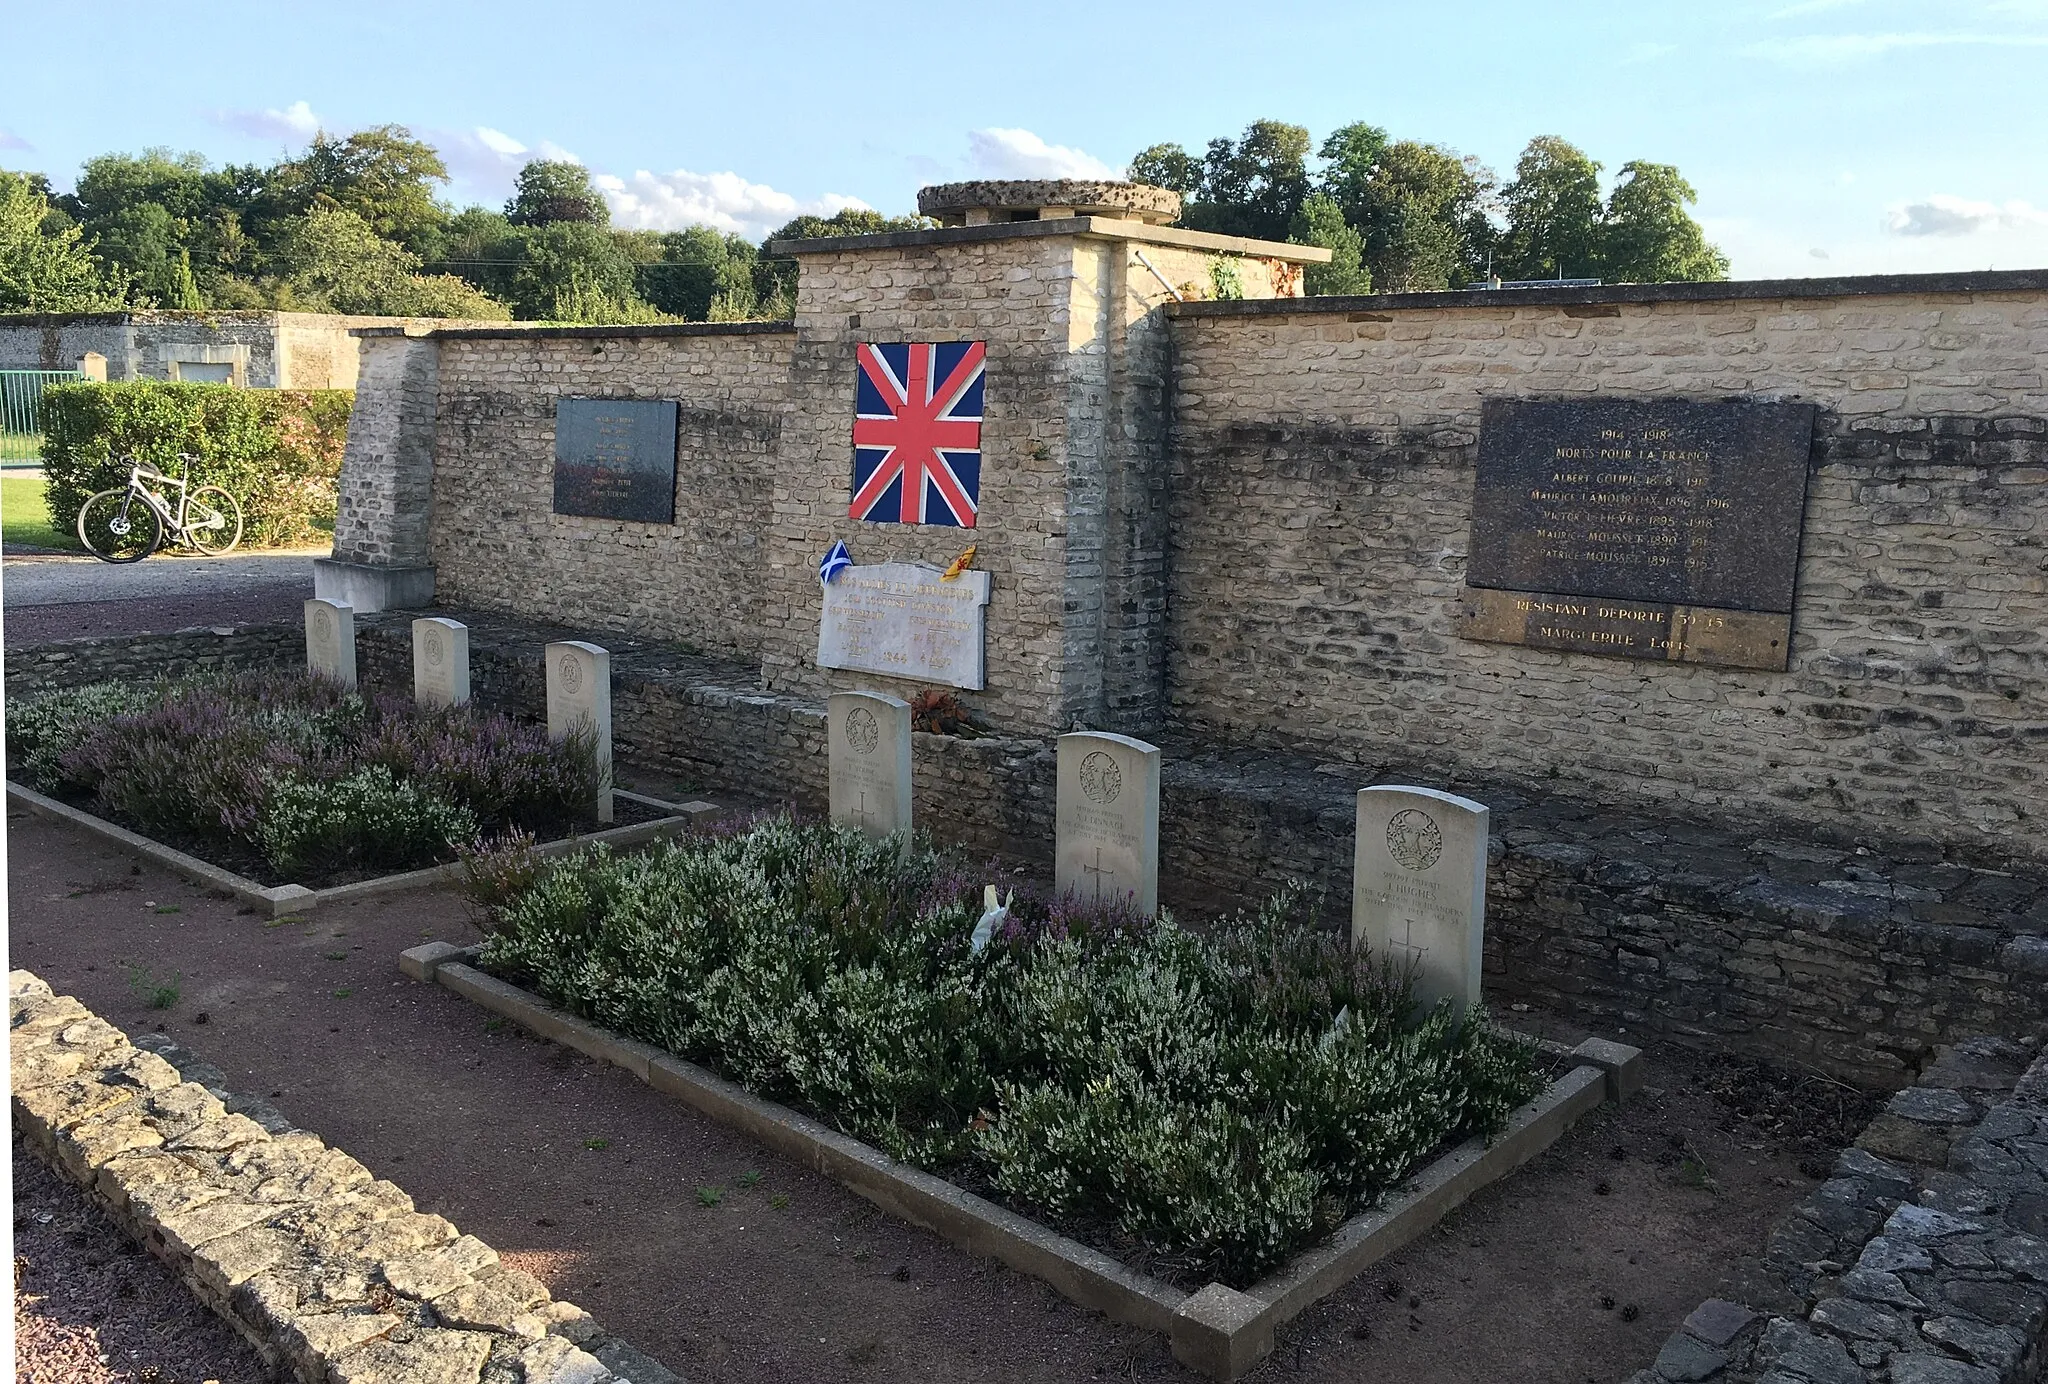 Photo showing: Memorial site dedicated to the 15th Scottish division involved in the battle of Odon, civilians who perish during the events and plaque commemorating local soldiers who died during WW1 and WW2. 6 British soldiers are also buried at the site